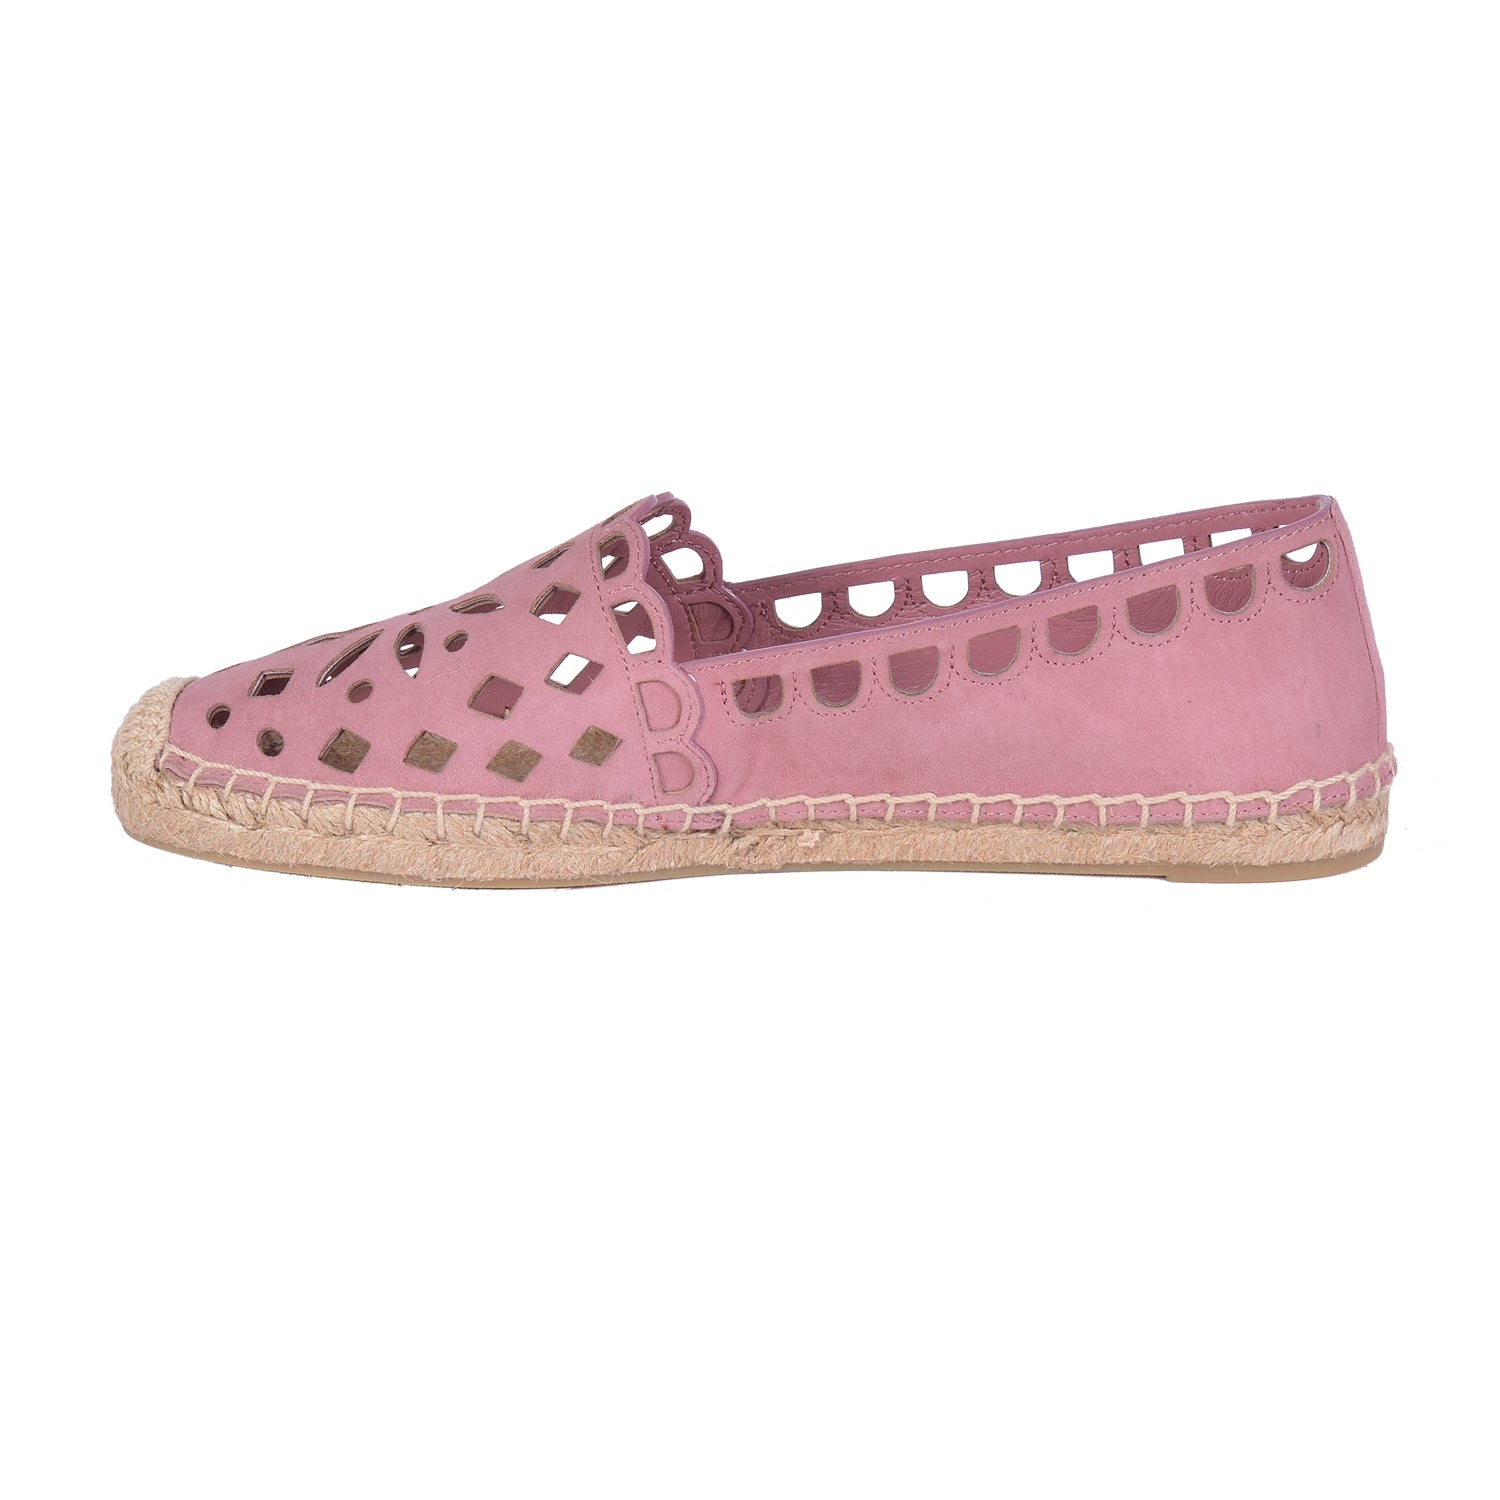 TORY BURCH MAY PERFORATED ESPADRILLE FLAT